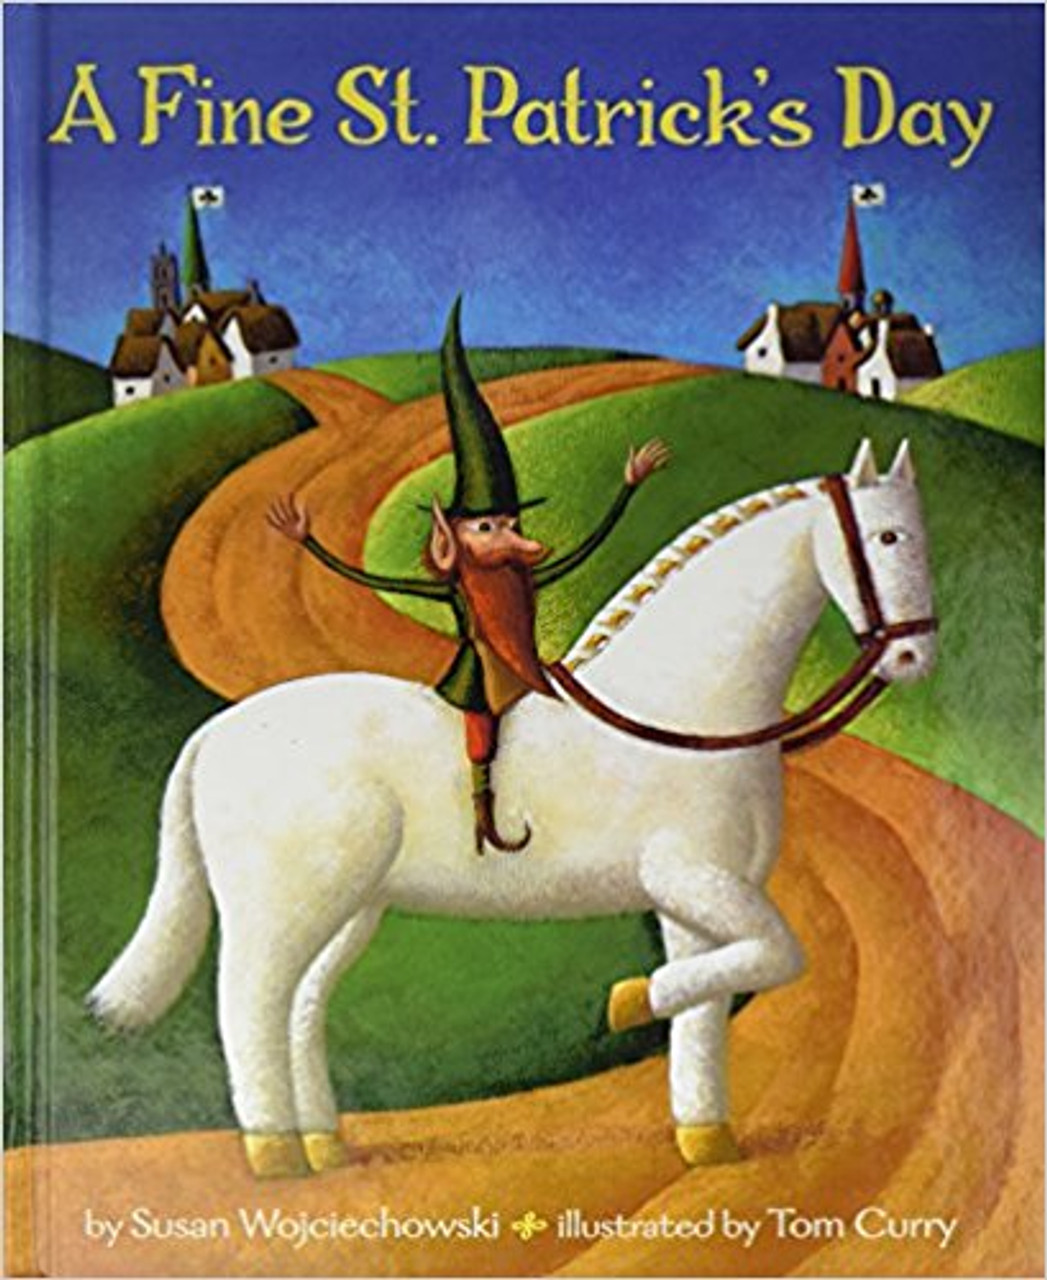 Every St. Patrick's Day two Irish towns compete for the best decorations. But no one has counted on a stranger arriving who will turn the contest upside down. Full color.